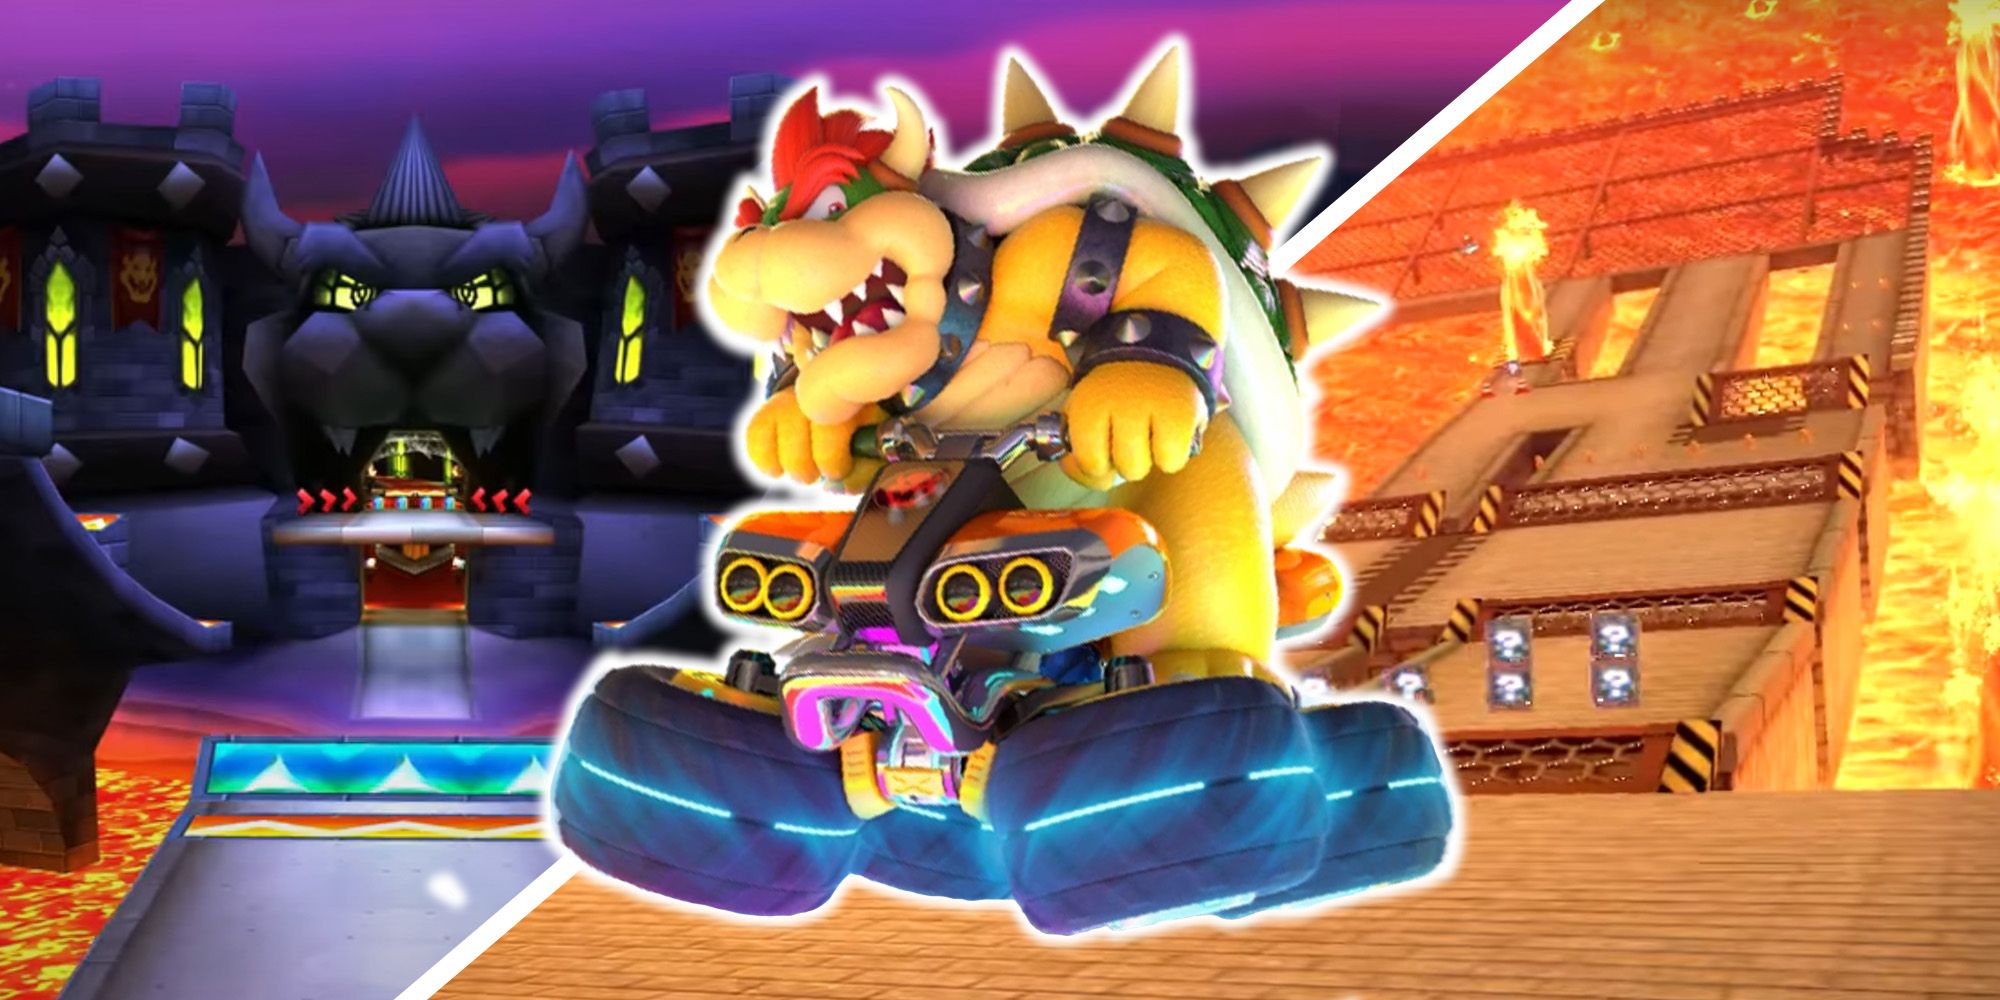 mario kart every version of boowser s castle ranked split image of 3ds bower s castle and bowser s castle 3 from the mario kart 8 deluxe booster course pass